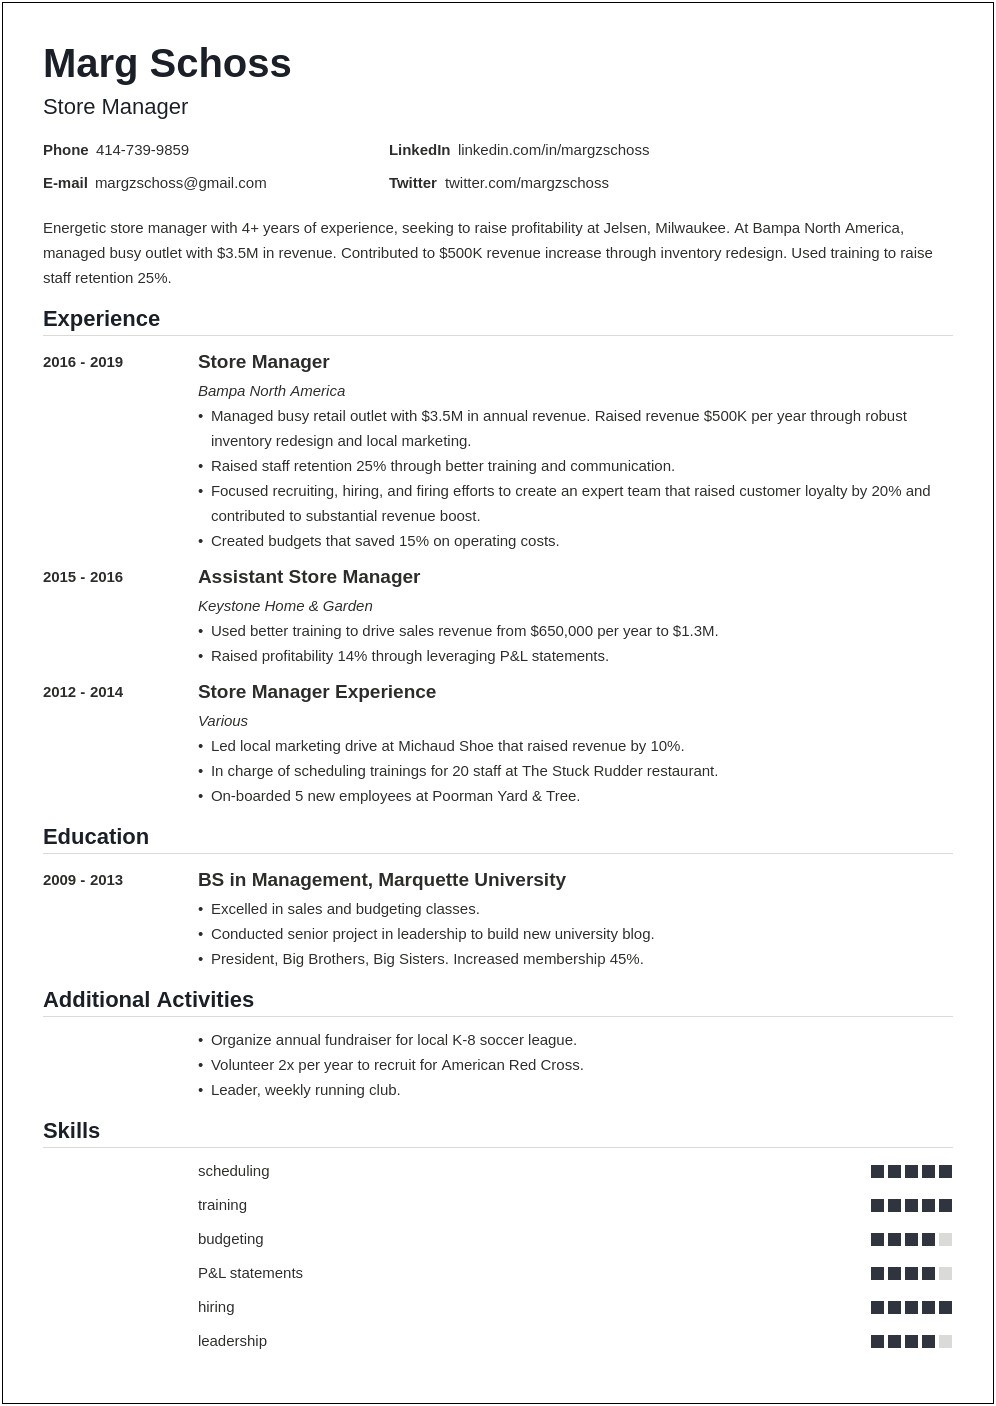 Resume Headline For Department Manager In Retail